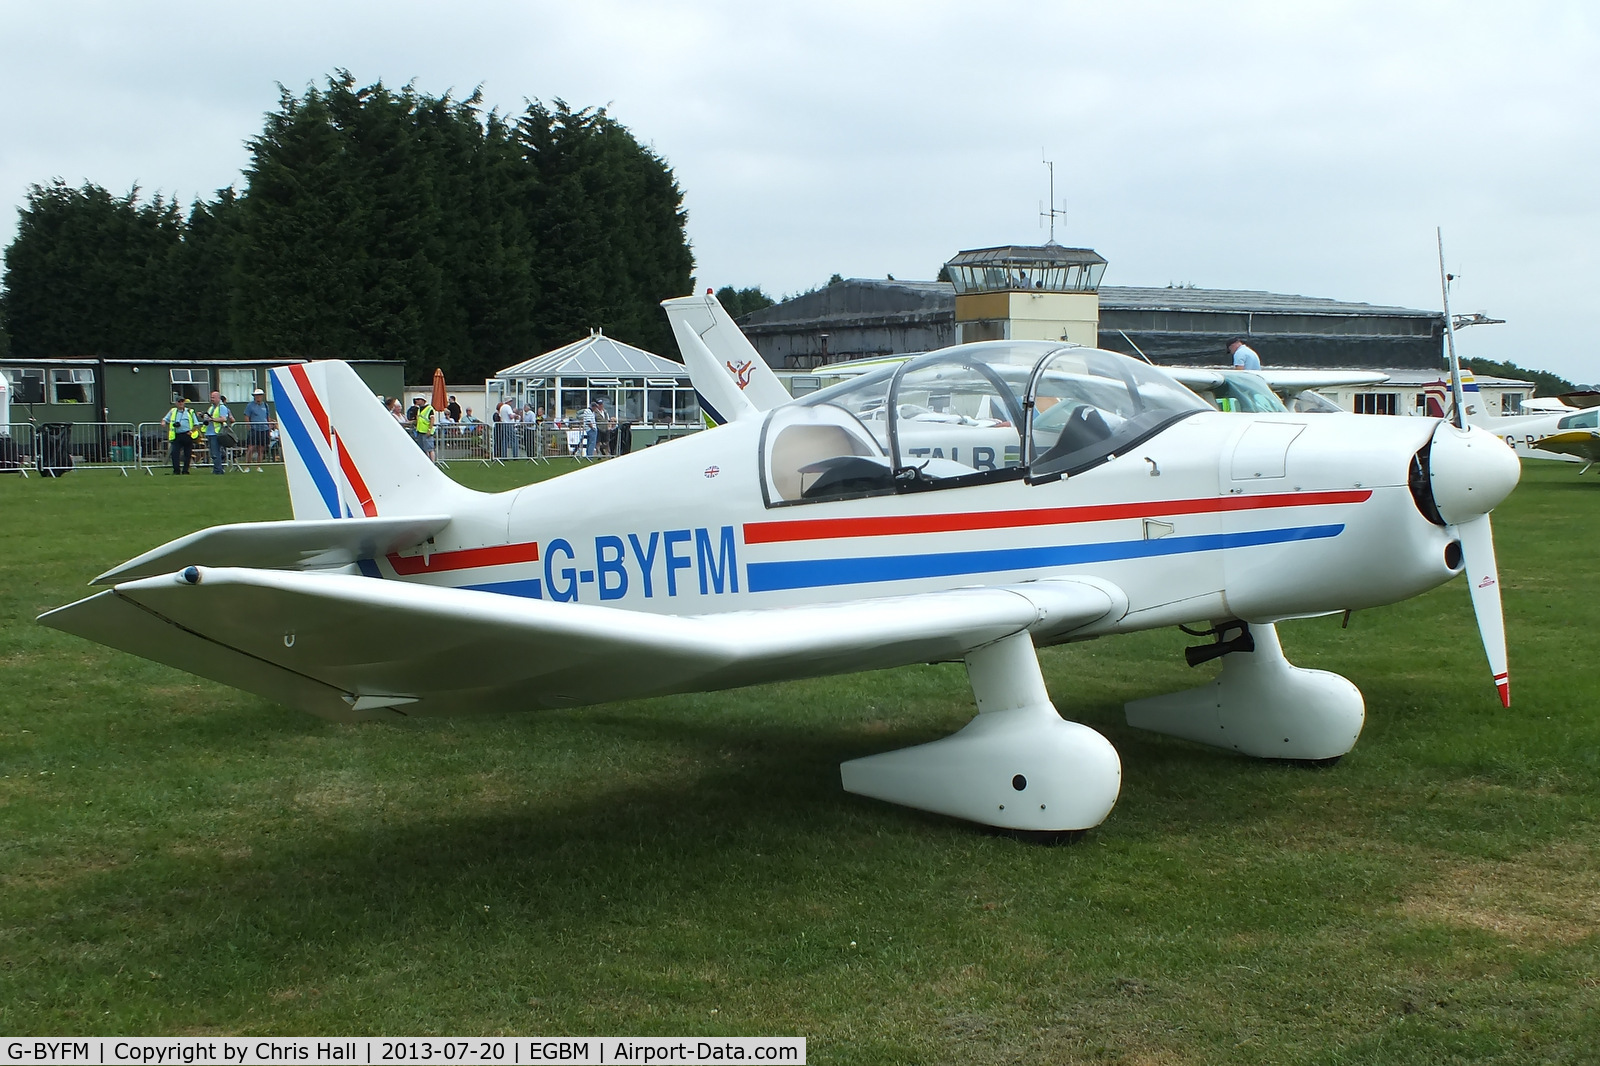 G-BYFM, 2000 Jodel DR-1050 M1 Excellence Replica C/N PFA 304-13237, at the Tatenhill Charity Fly in